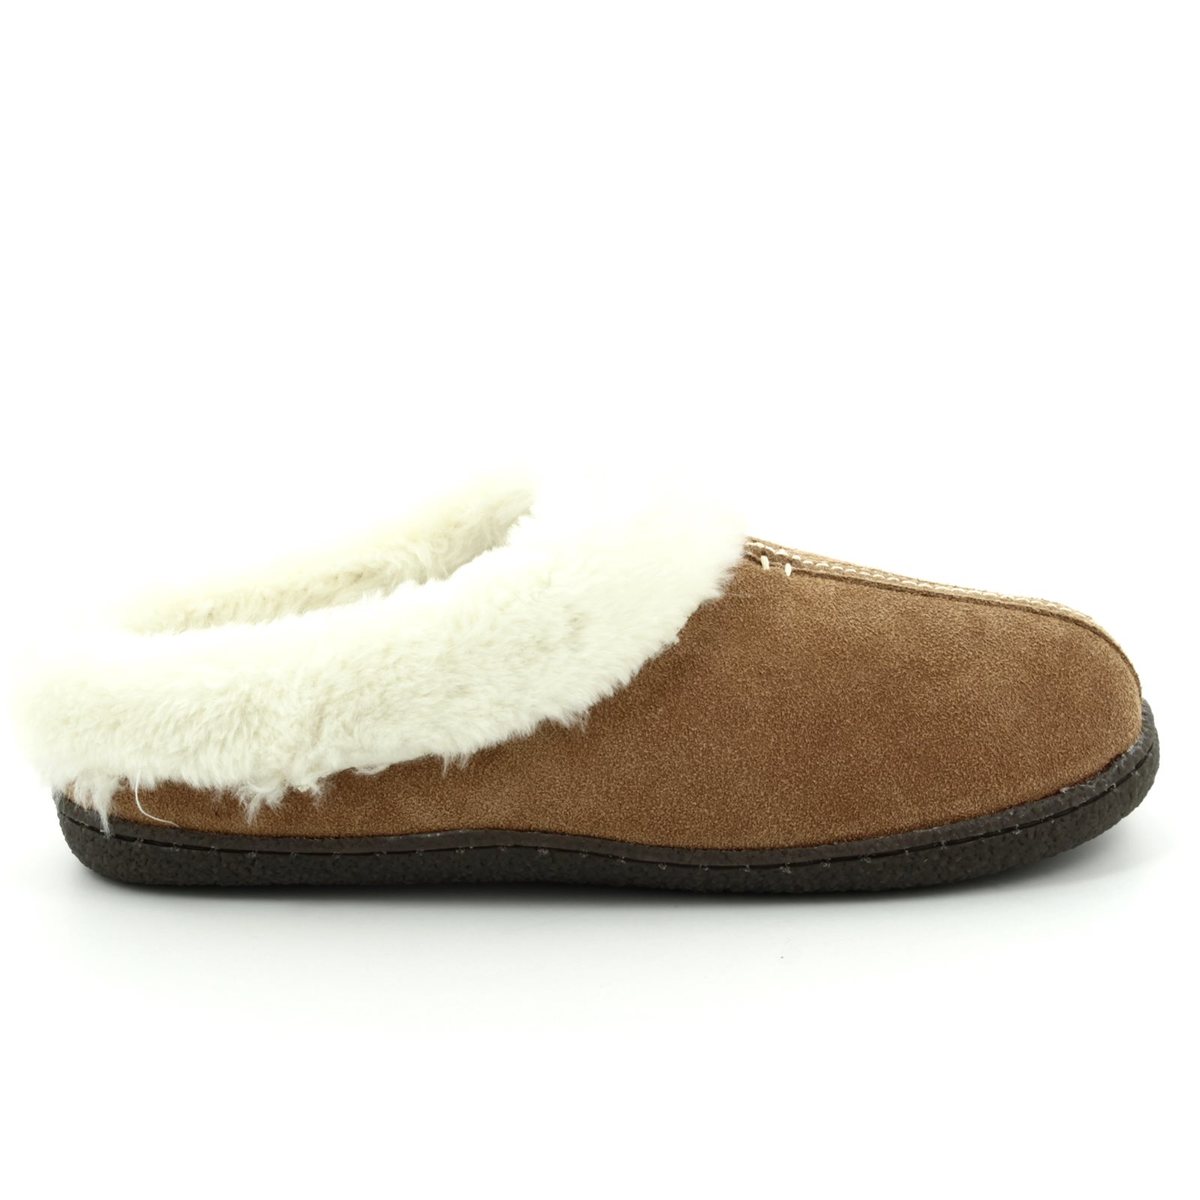 Clarks Home Classic D Fit Tan suede 